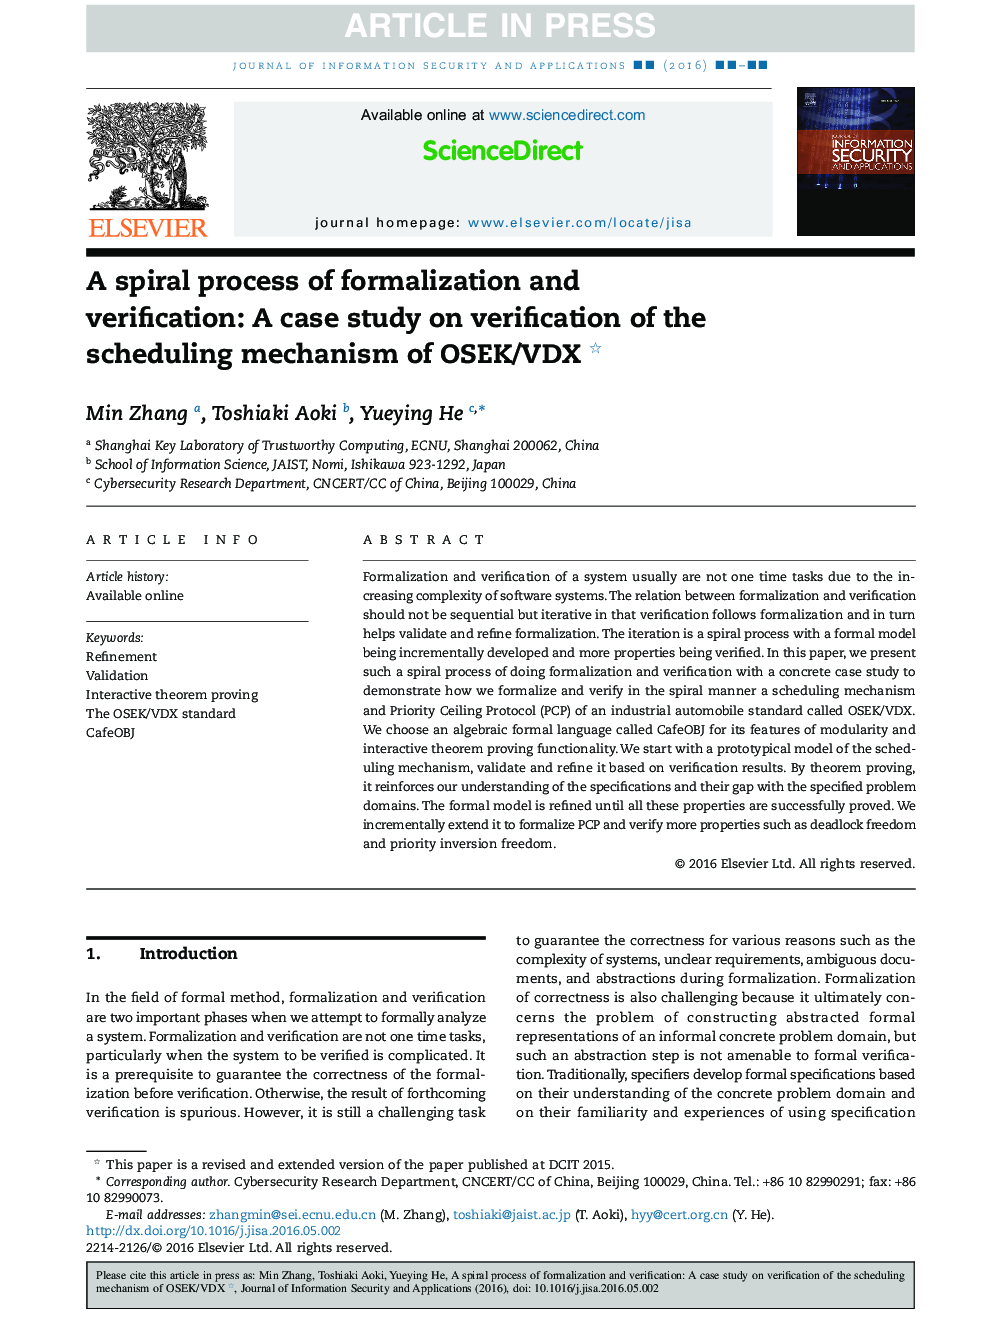 A spiral process of formalization and verification: A case study on verification of the scheduling mechanism of OSEK/VDX